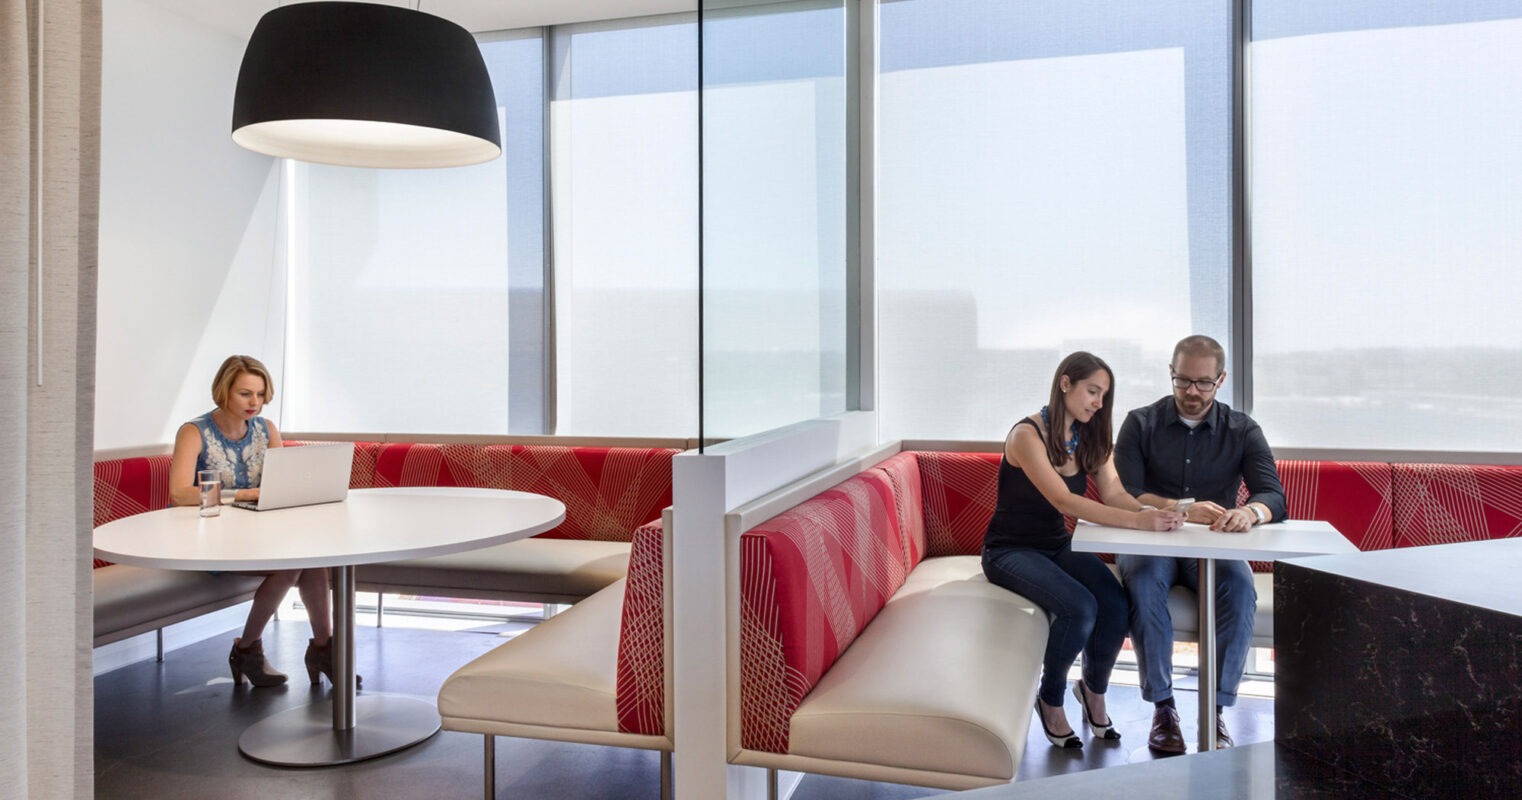 Modern office breakroom featuring a sleek white communal table, red geometric-patterned banquette seating, and an oversized white pendant light. Roller blinds diffuse sunlight, while employees engage in conversation and work on laptops, illustrating a dynamic, productive space with a striking color palette.